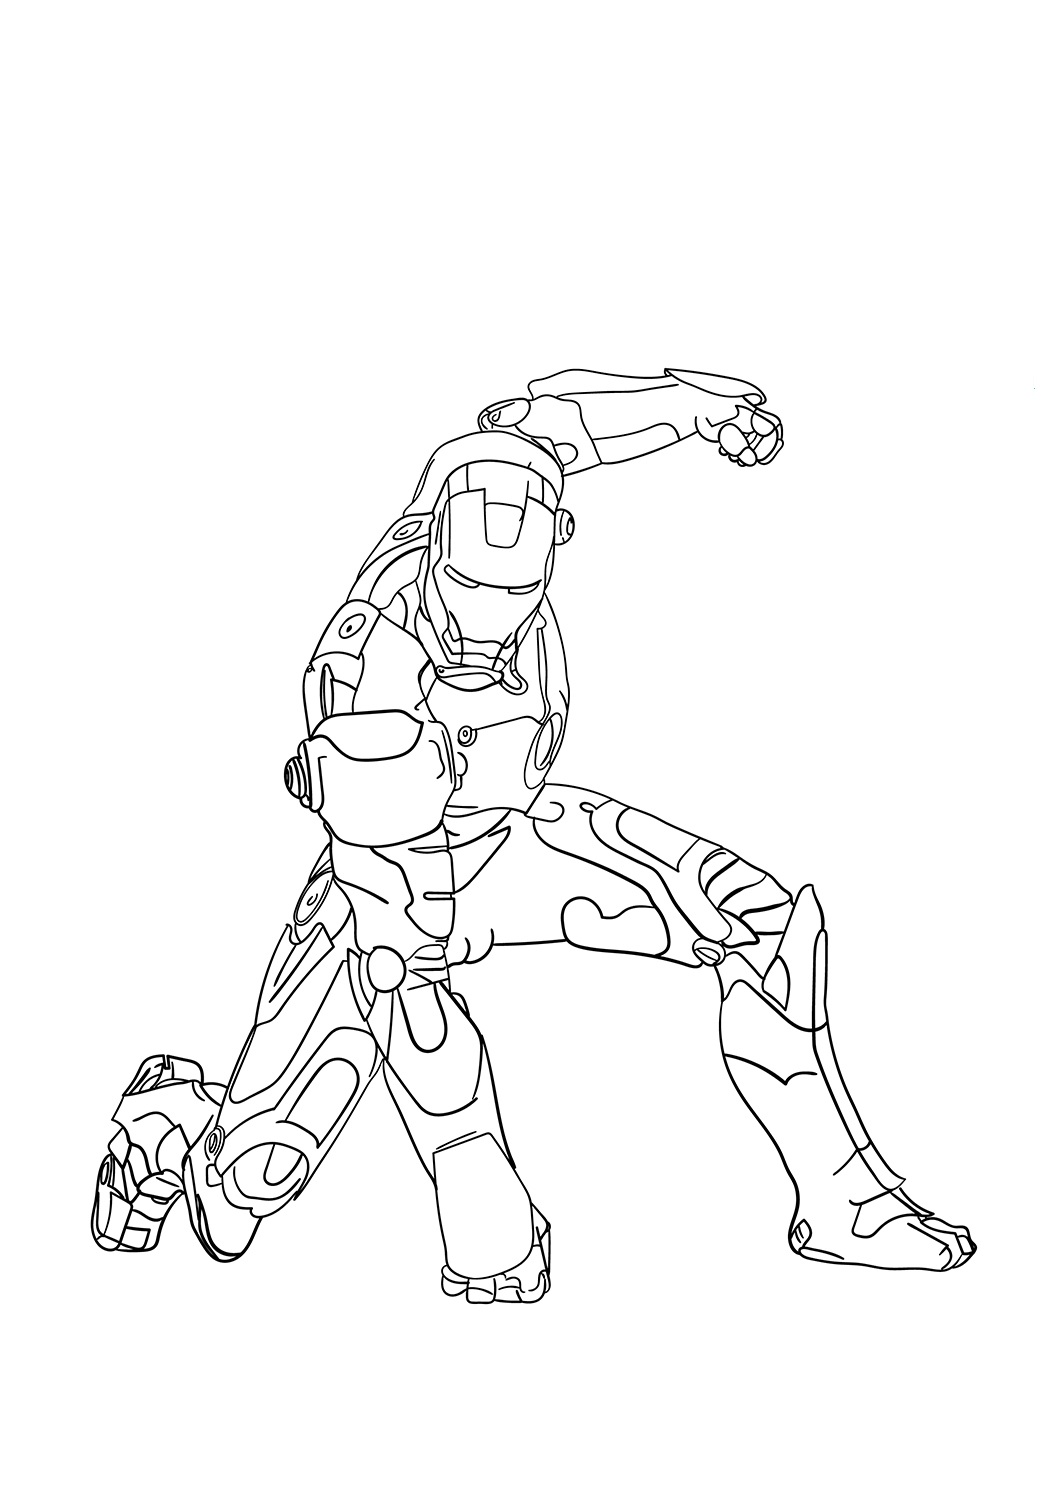 Iron Man Fighting Coloring Page - Free Printable Coloring Pages for Kids